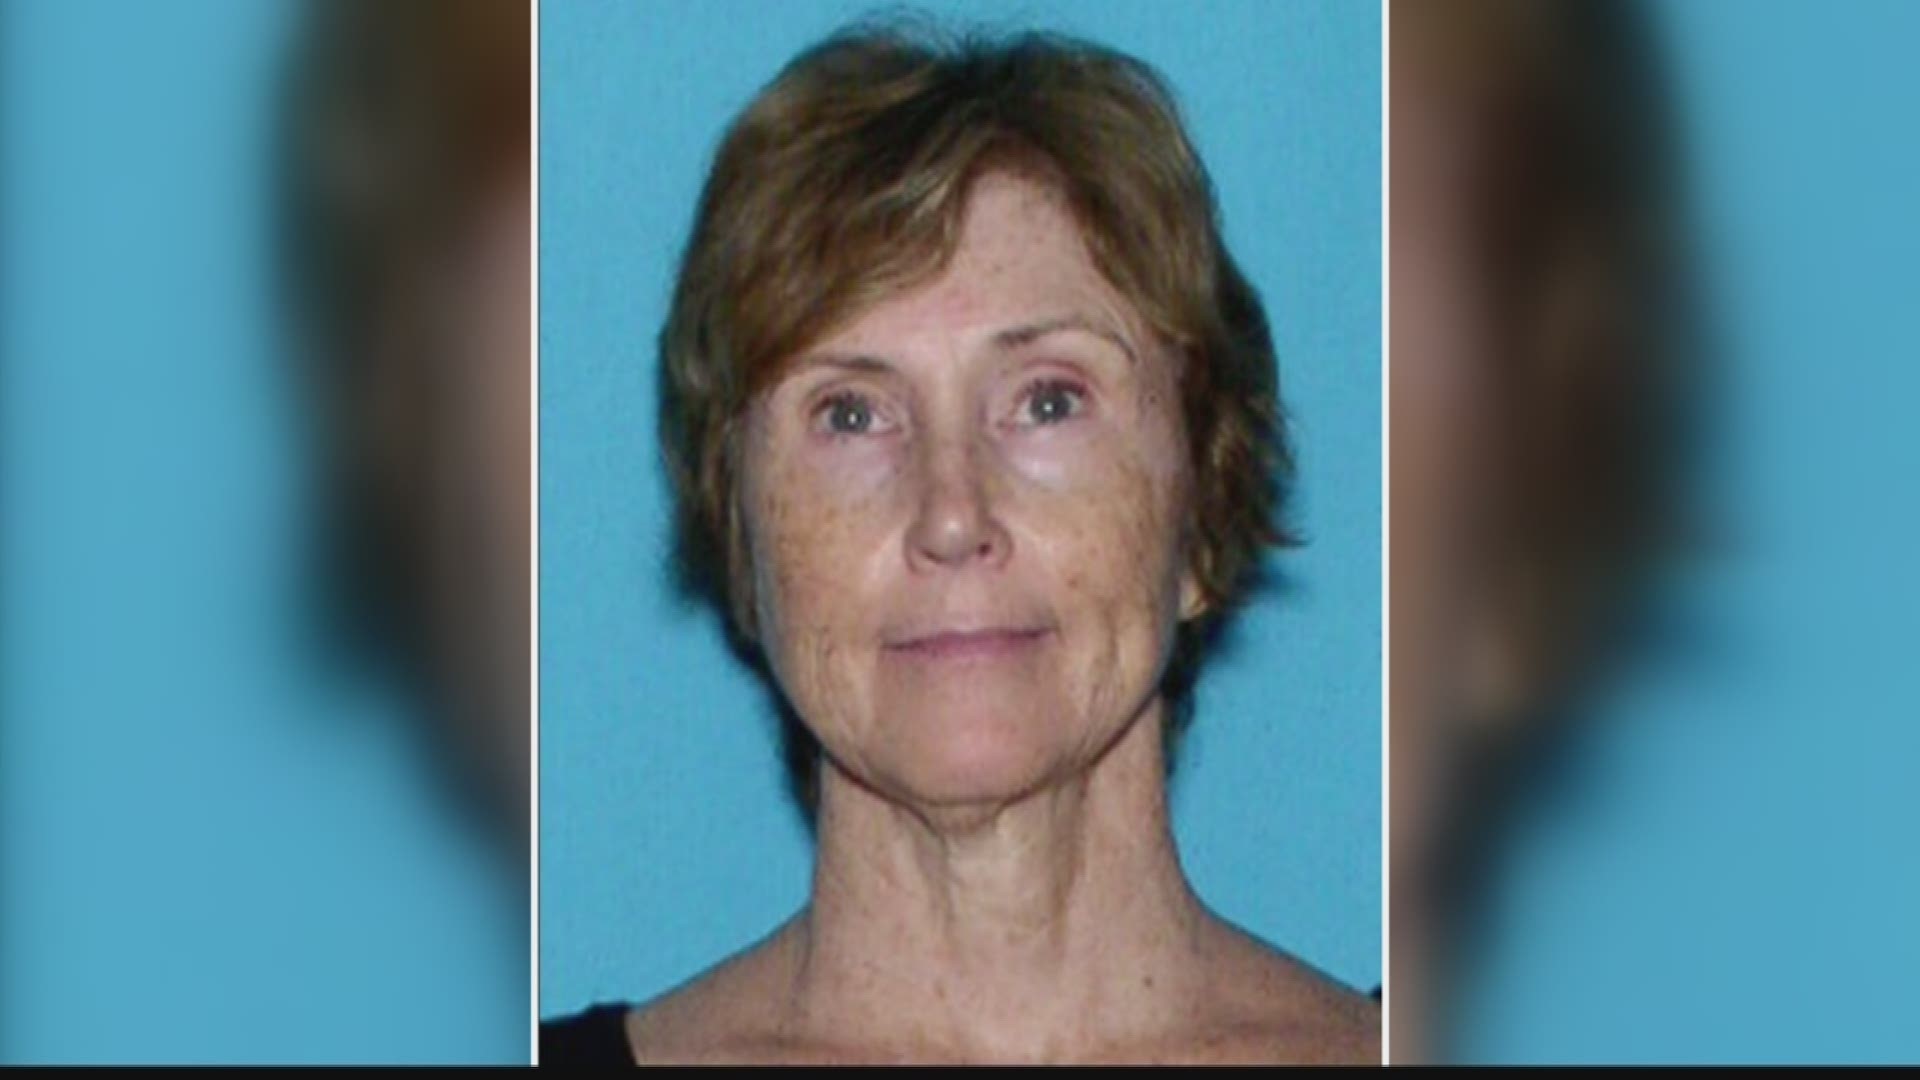 Christine Smith, 64, was last seen Monday afternoon. She wandered off without her medicine. If you have seen her, please contact the Sheriff's Office.